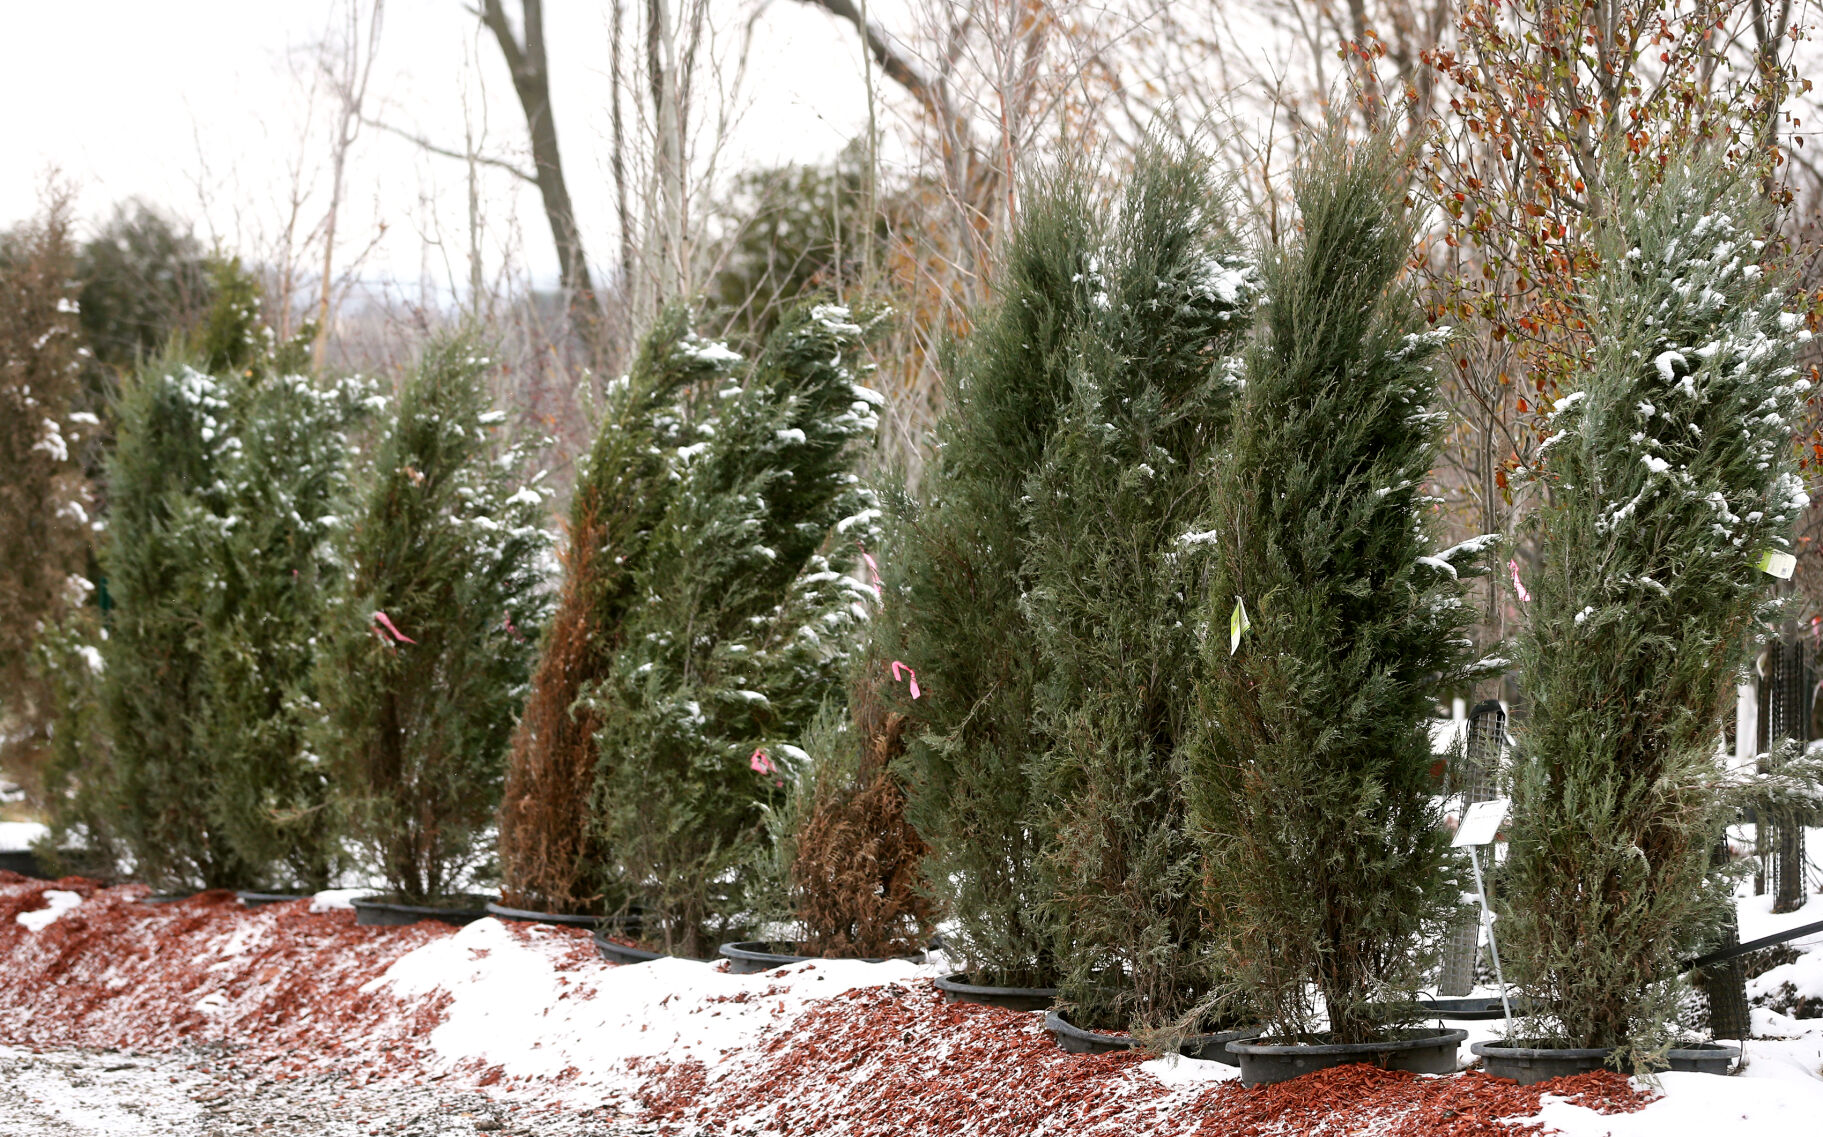 Wagner Nursery in Asbury, Iowa, has a variety of trees available.    PHOTO CREDIT: JESSICA REILLY, Telegraph Herald